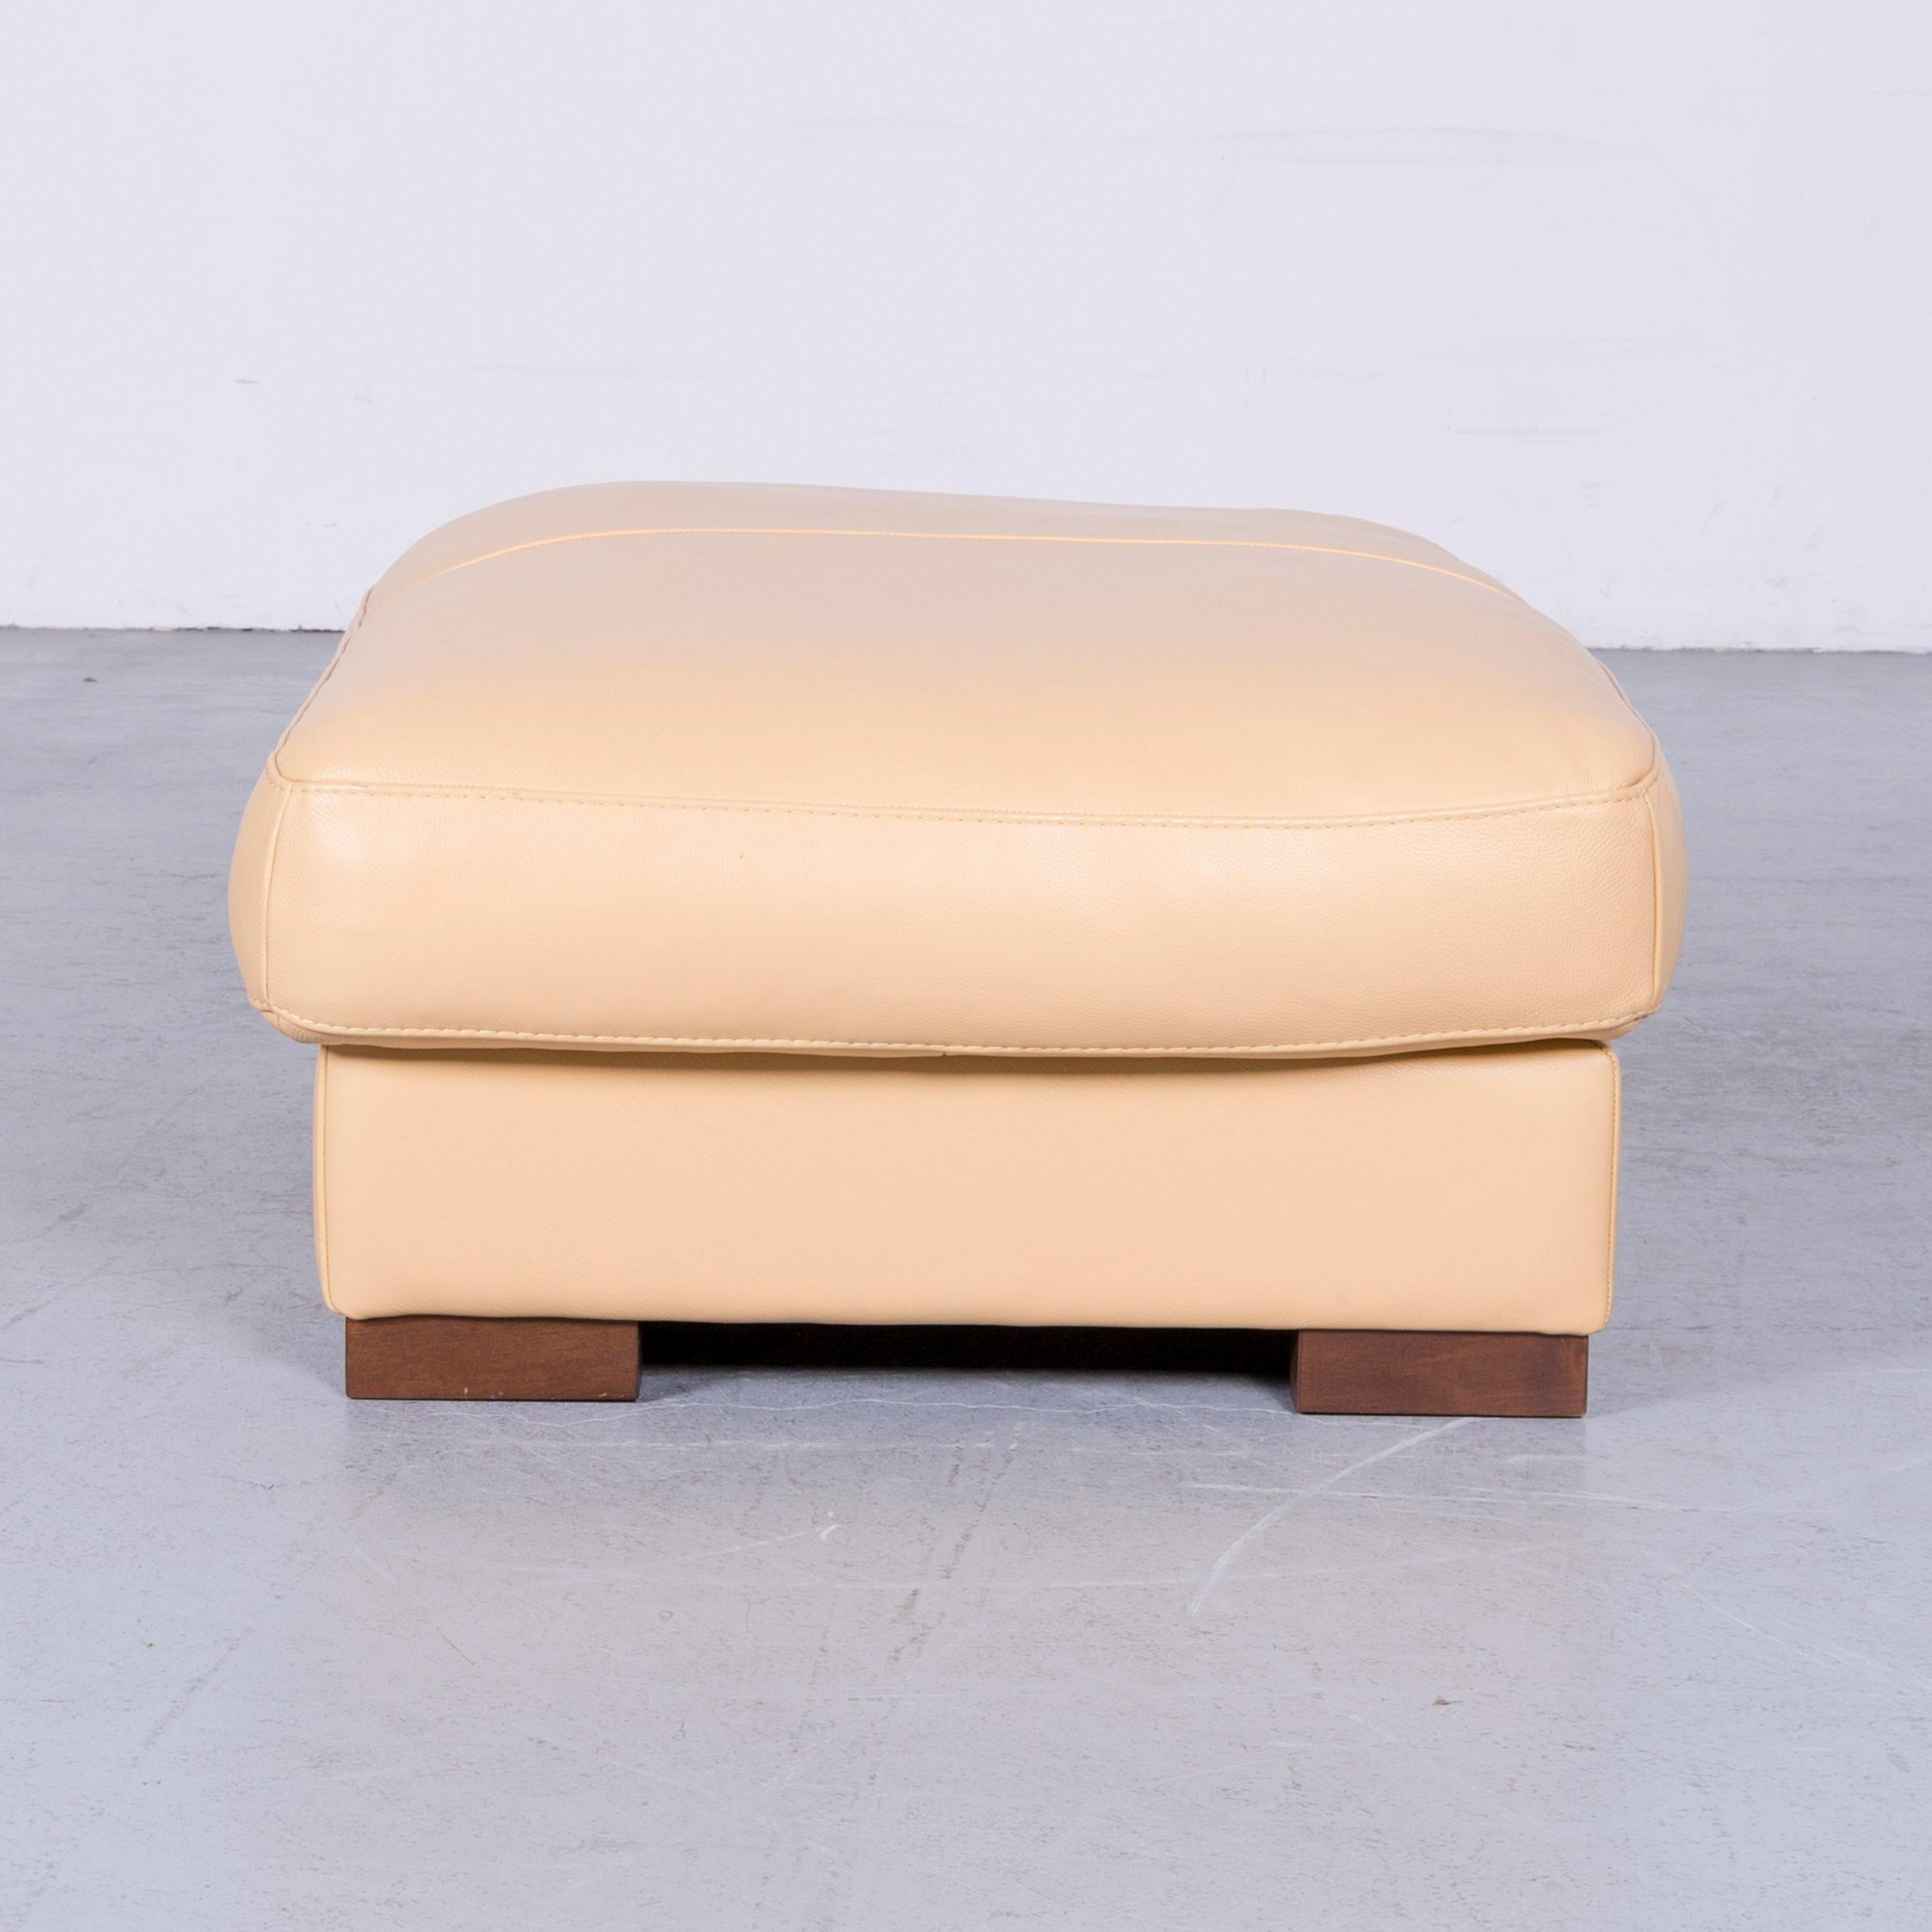 Designer Footstool Anilin Leather Beige One Seat Couch 2